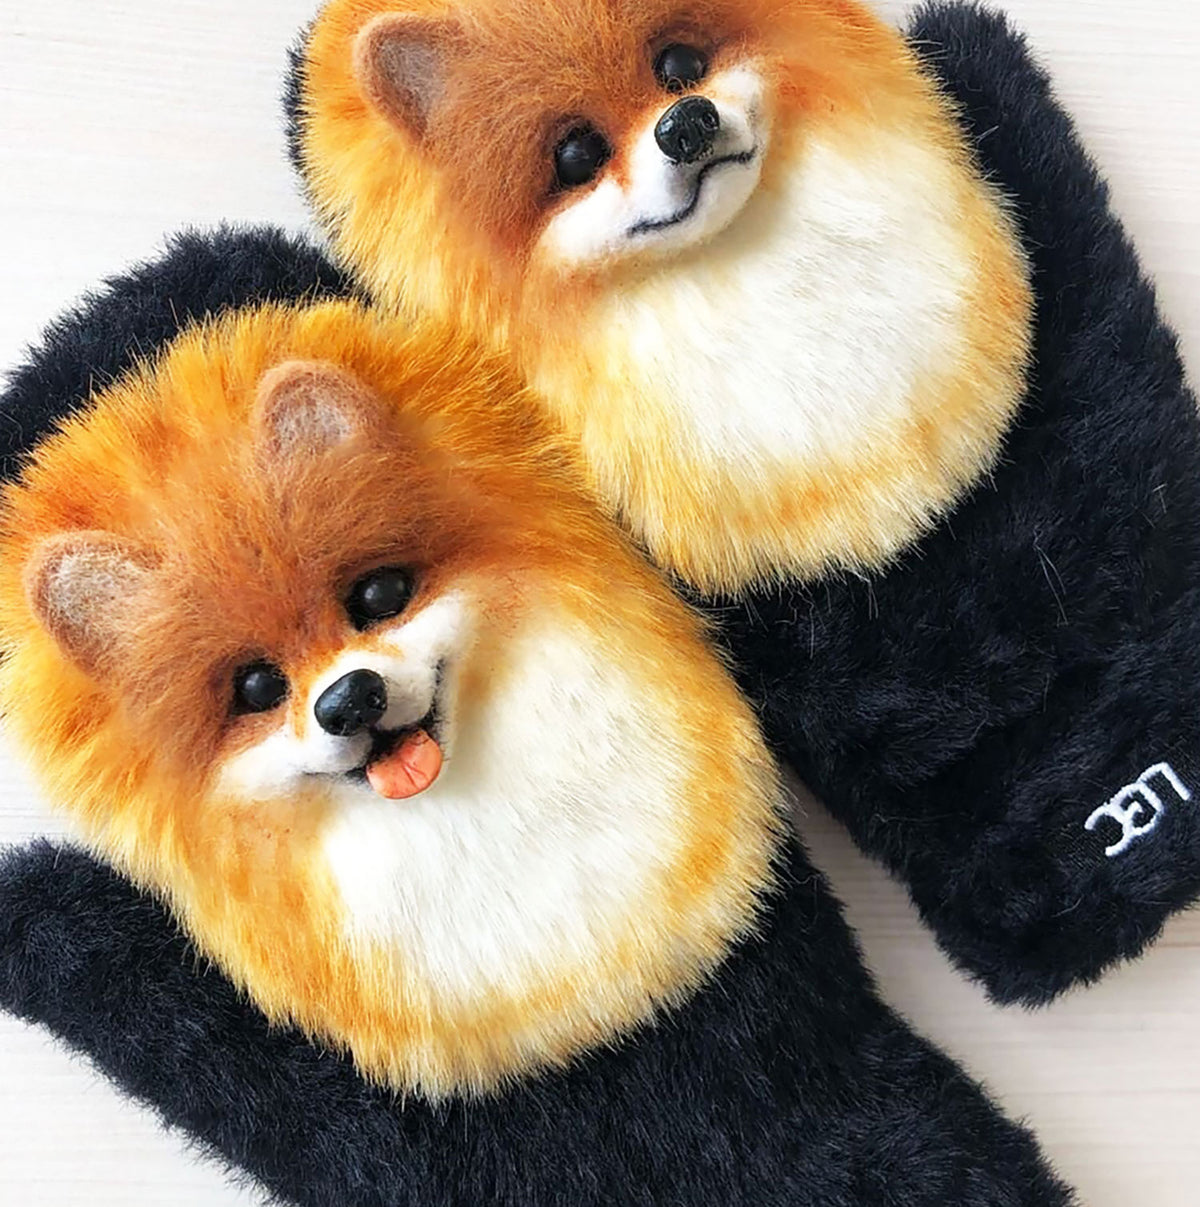 Felt Dog Mittens from Photo - Chihuahua